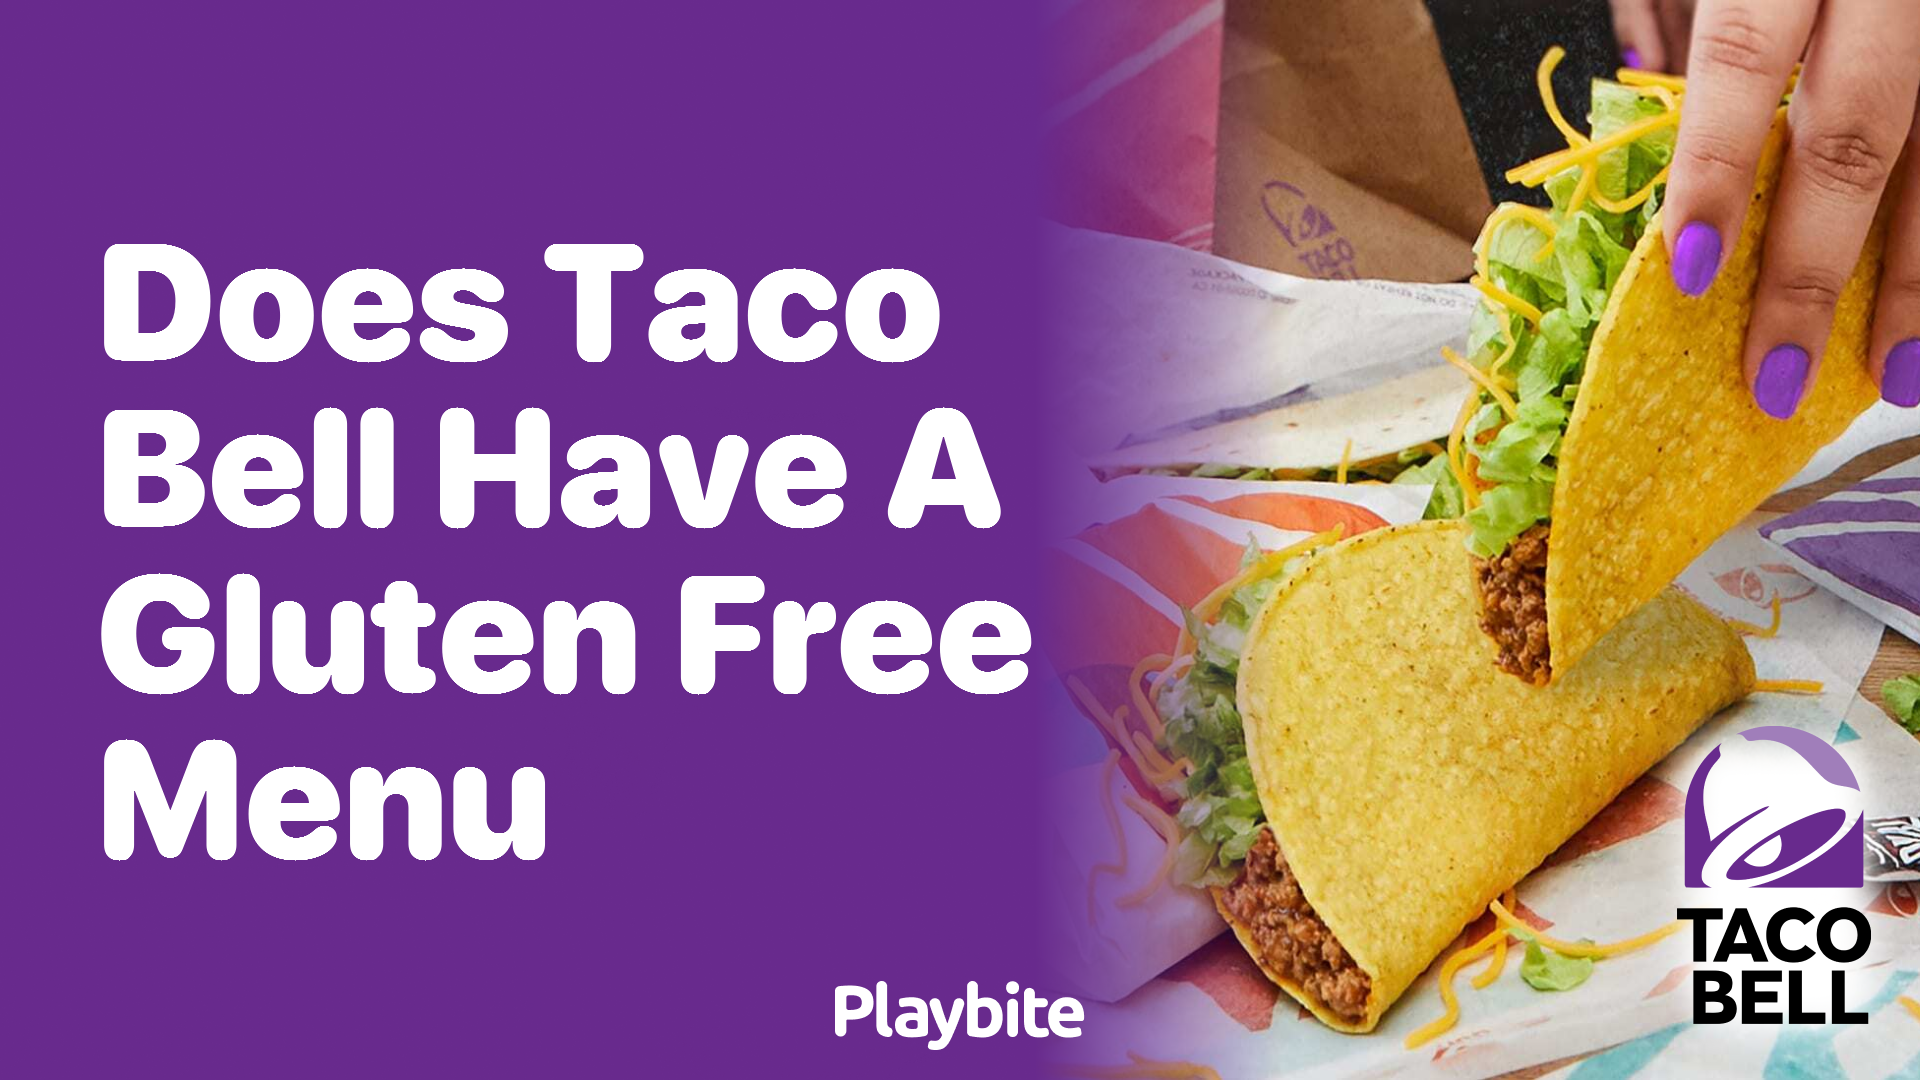 Does Taco Bell Have a Gluten-Free Menu? Find Out Here!